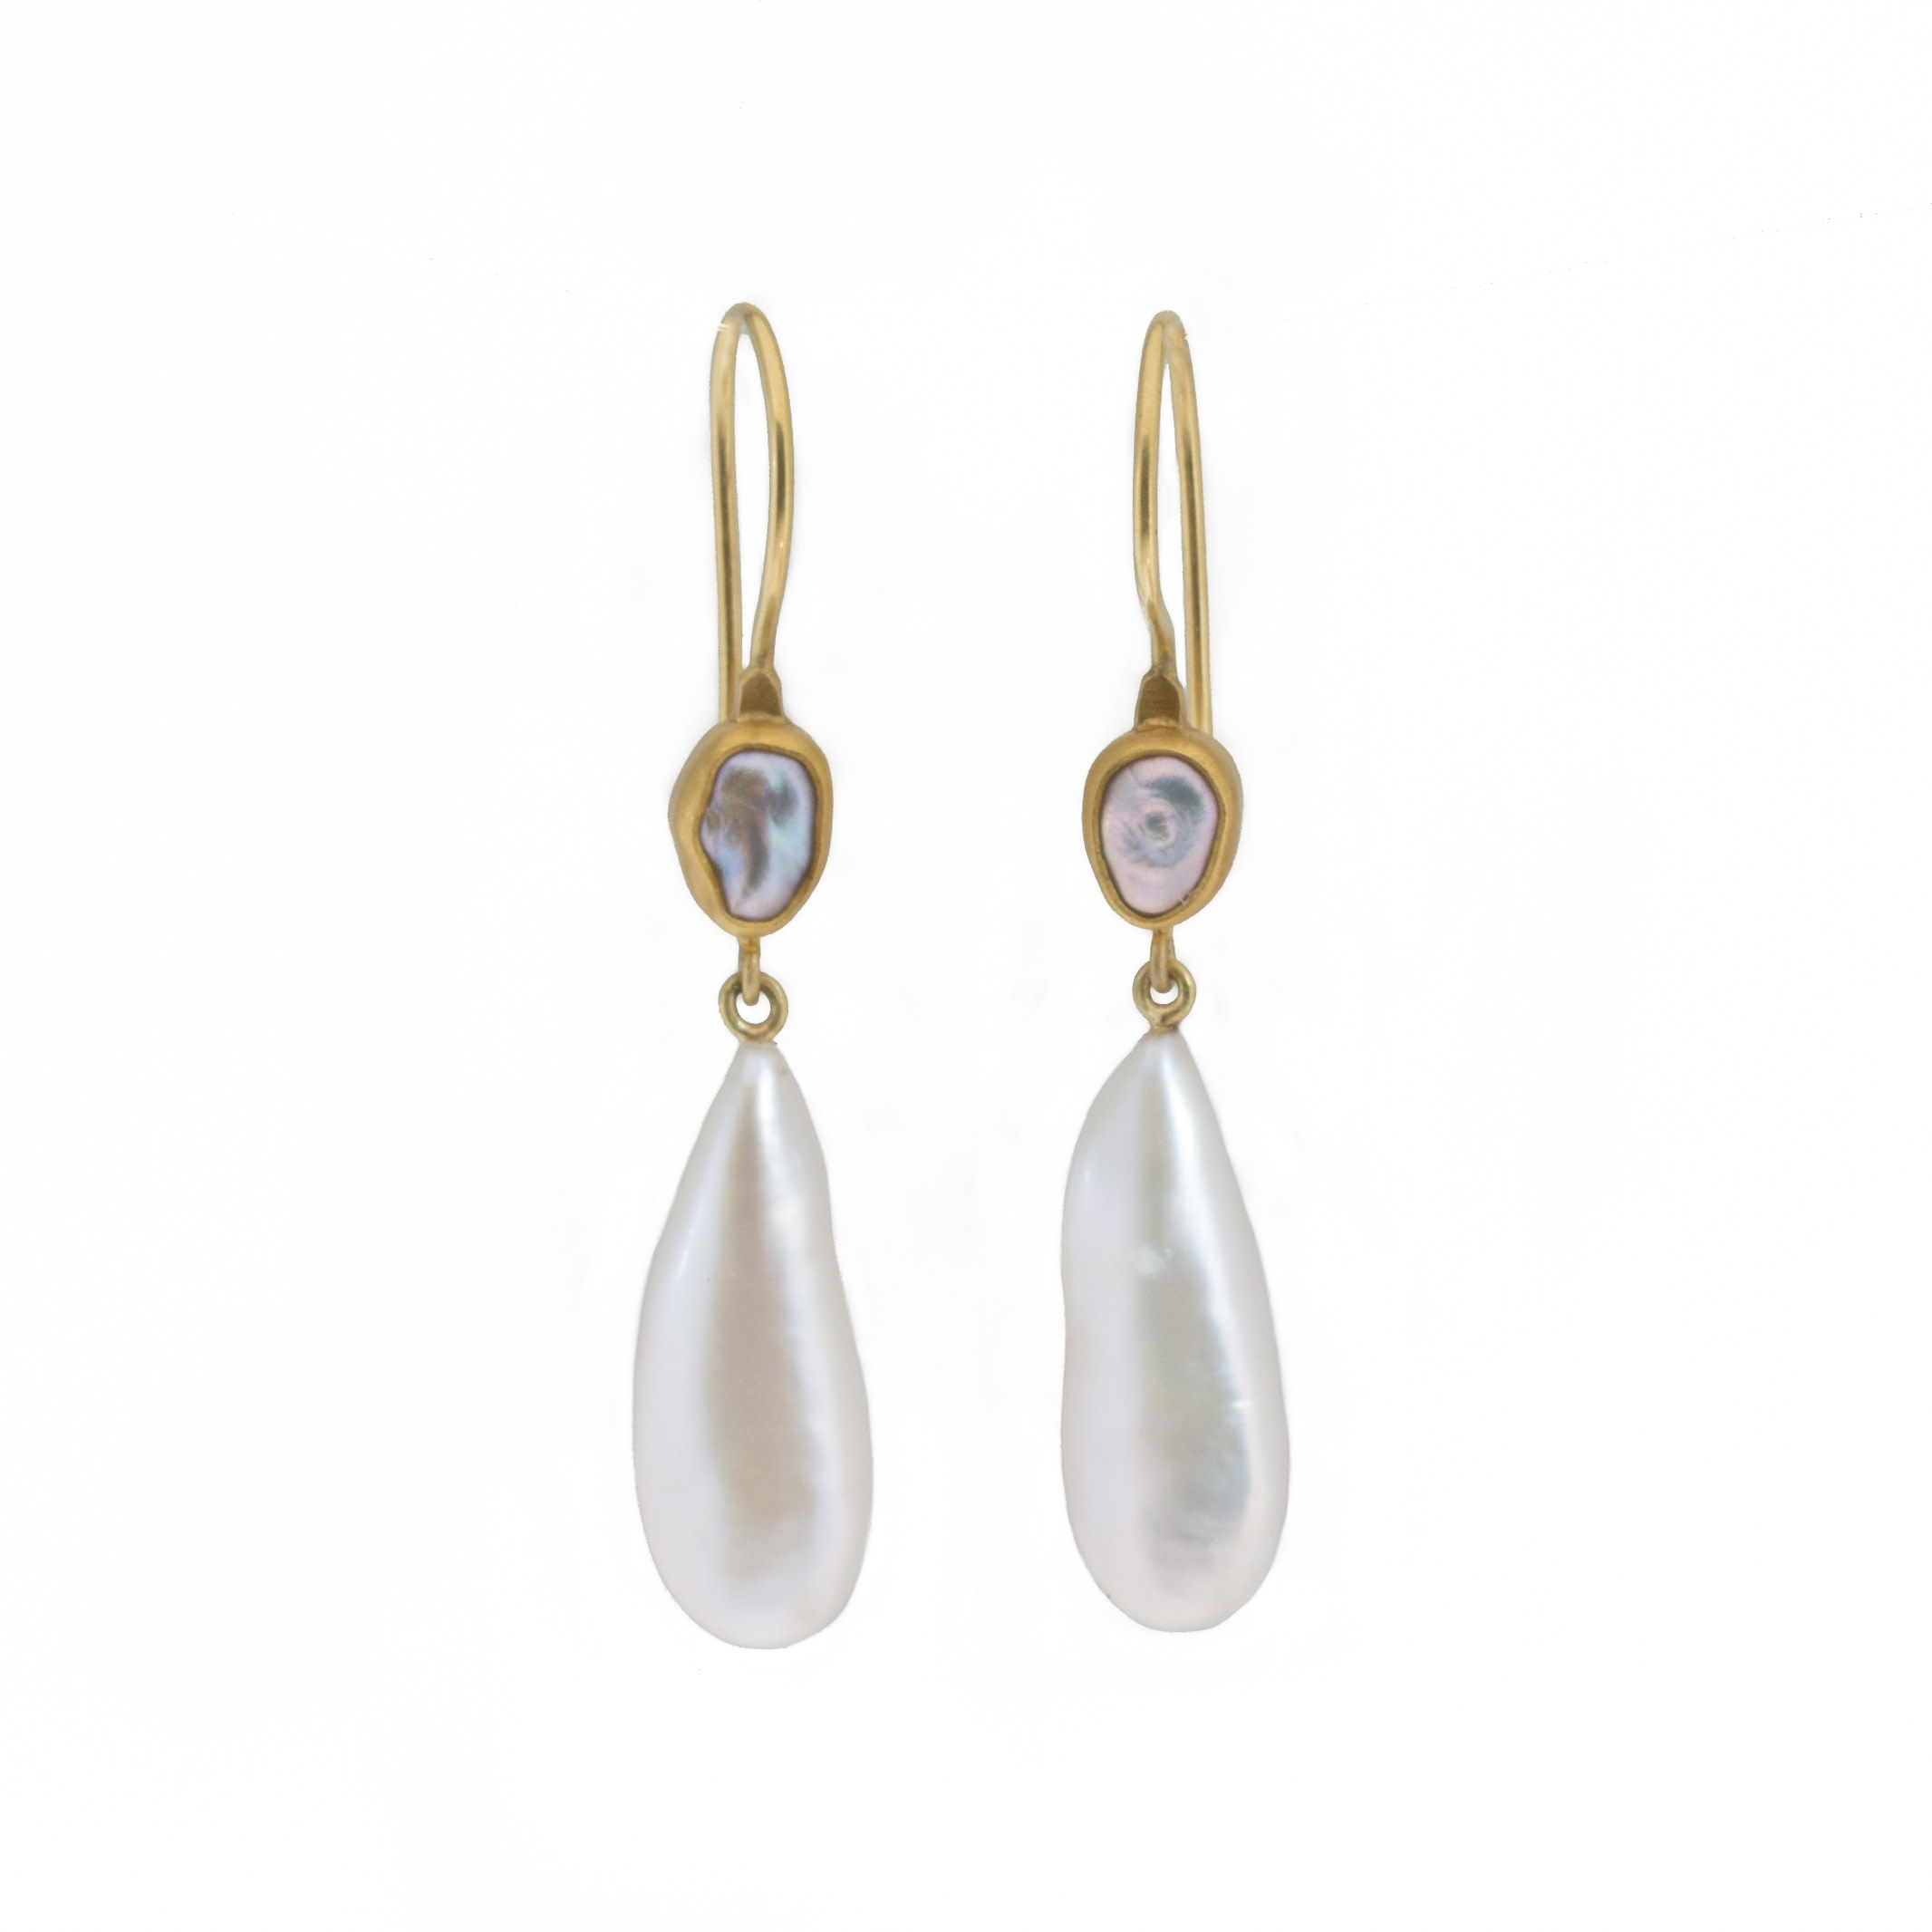 Double Pearl Drop Earrings in 22k and 18k Yellow Gold